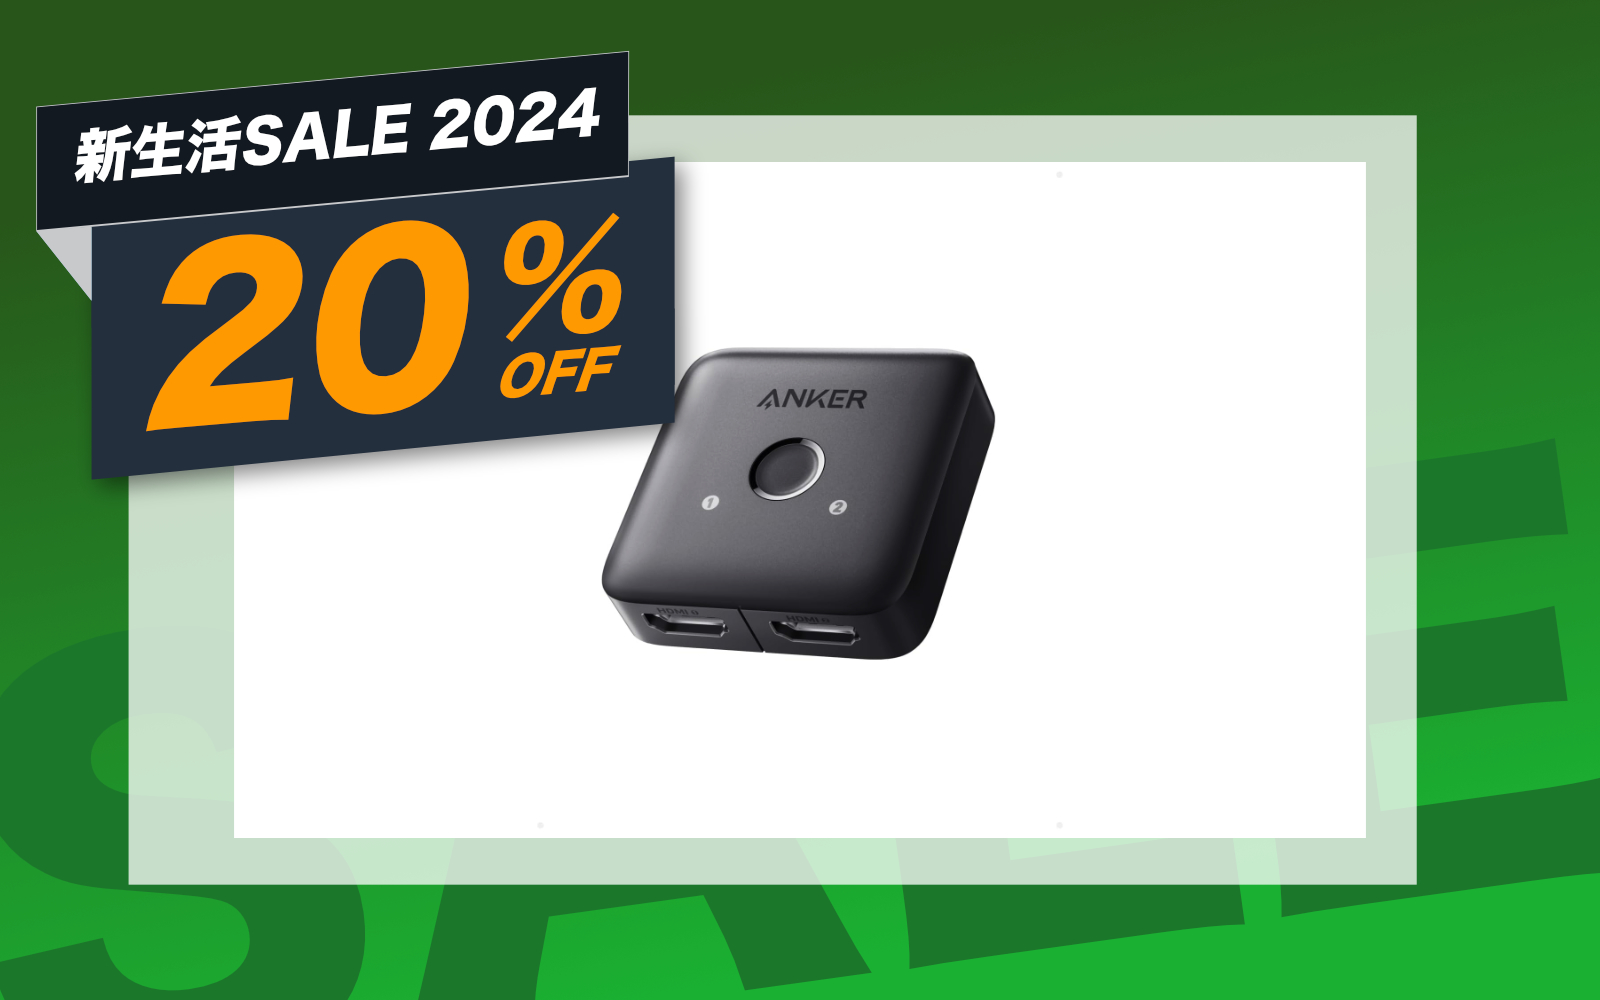 Anker HDMI device on sale